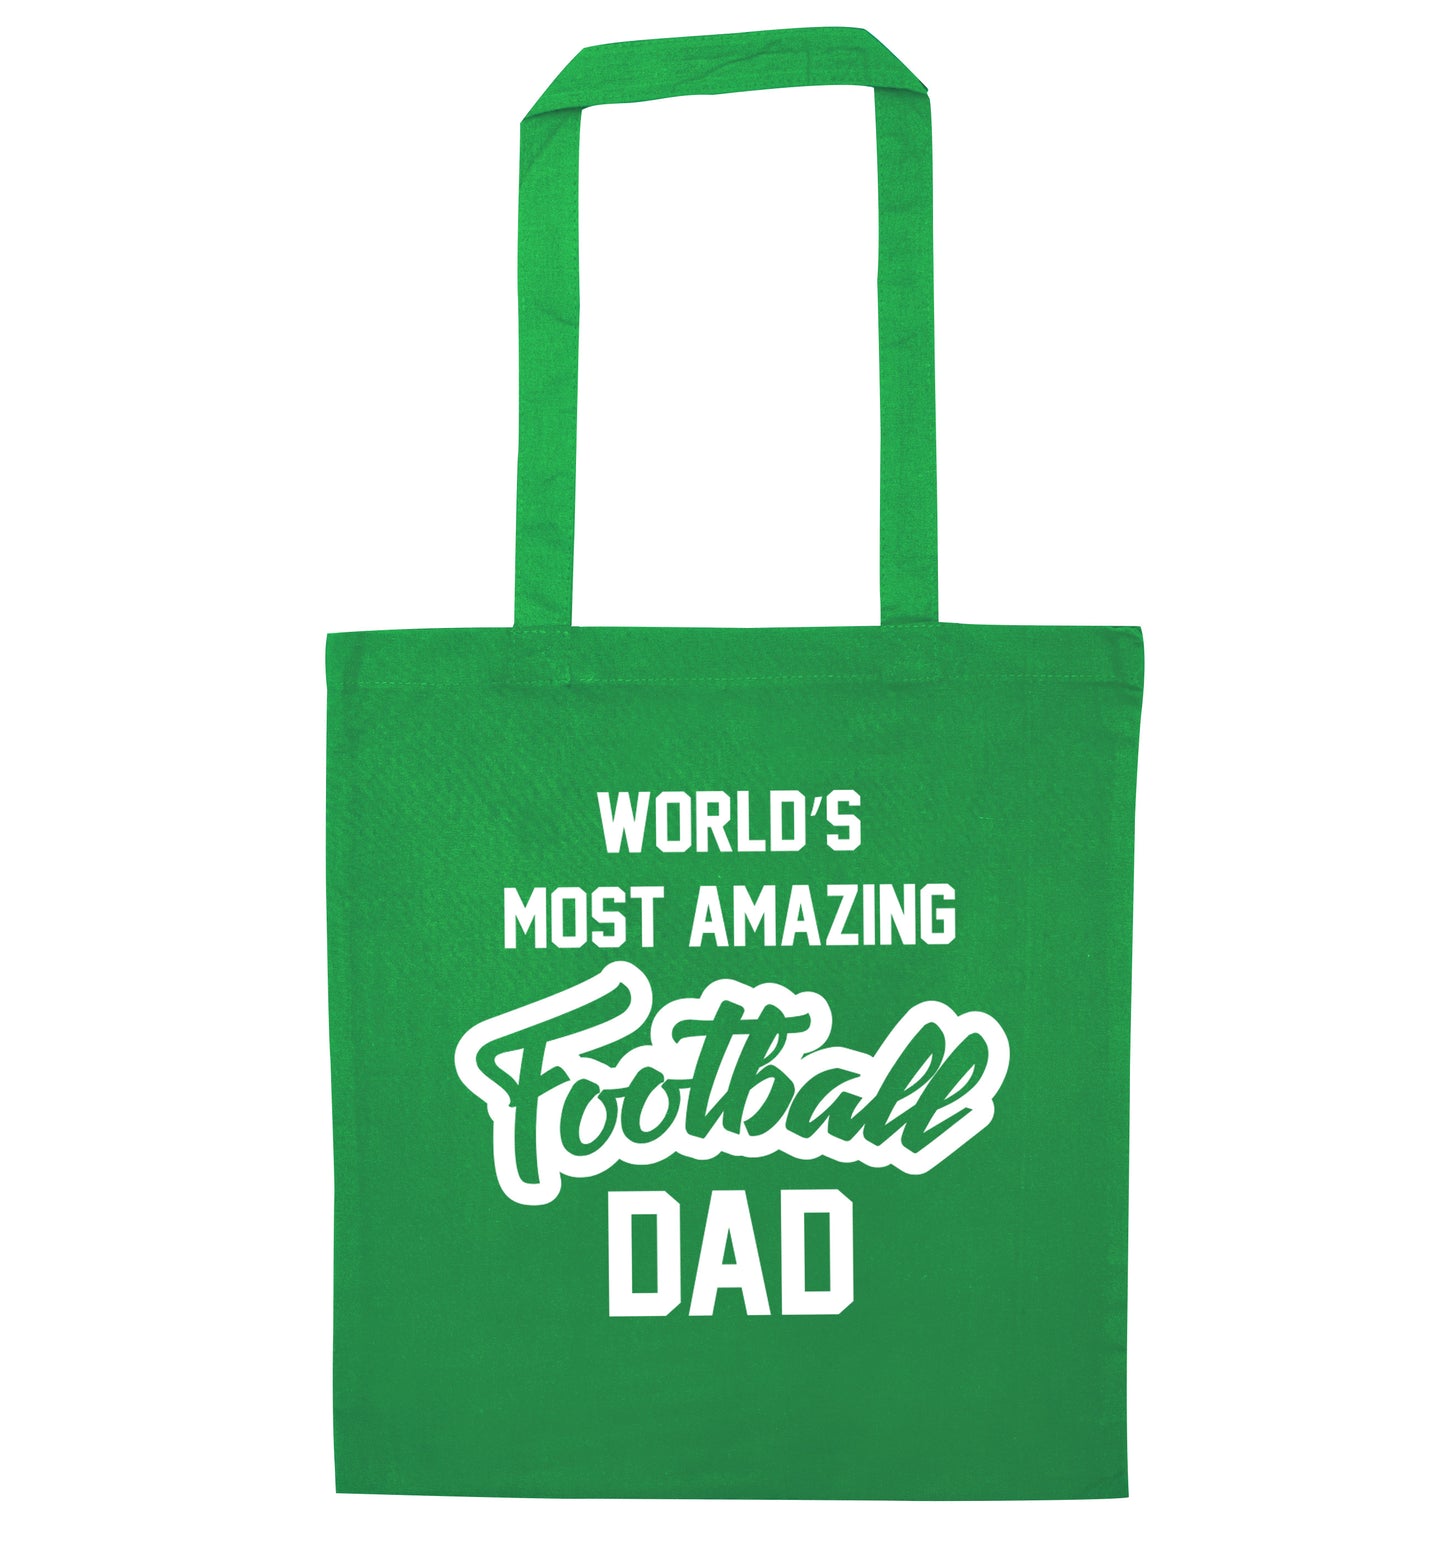 Worlds most amazing football dad green tote bag